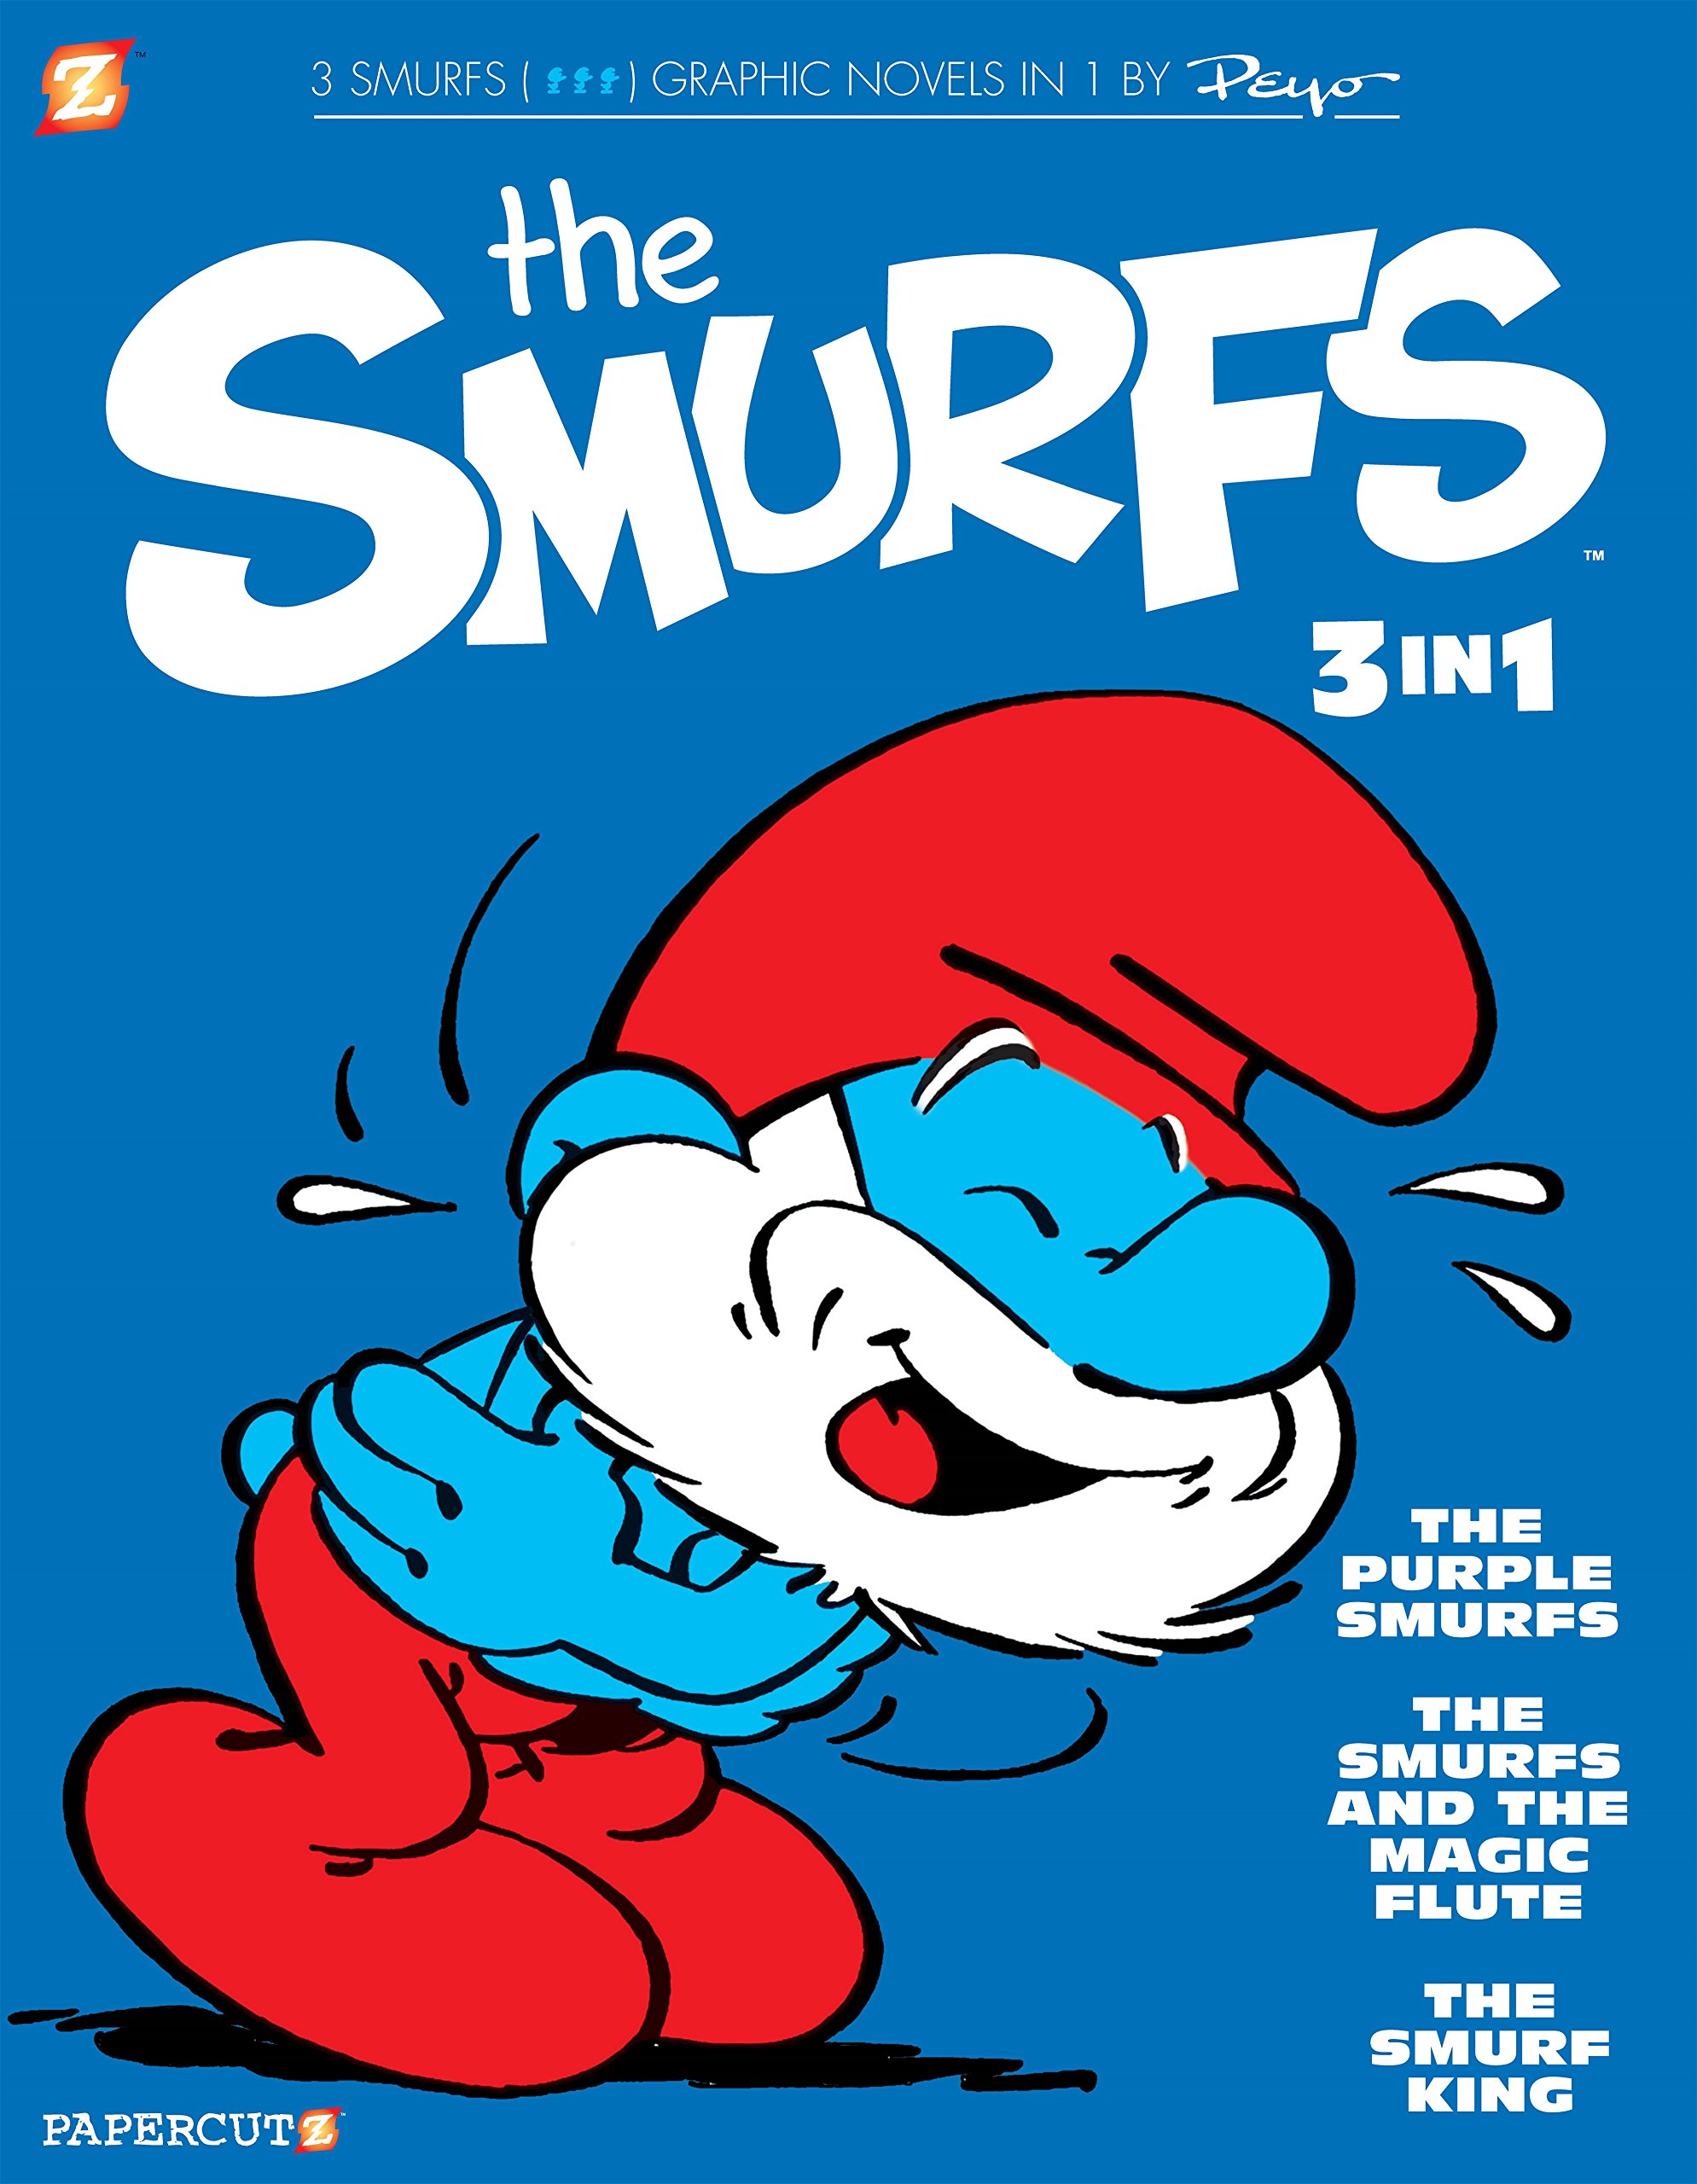 The Smurfs 3-in-1 #1: The Purple Smurfs, The Smurfs and the Magic Flute, and The Smurf King